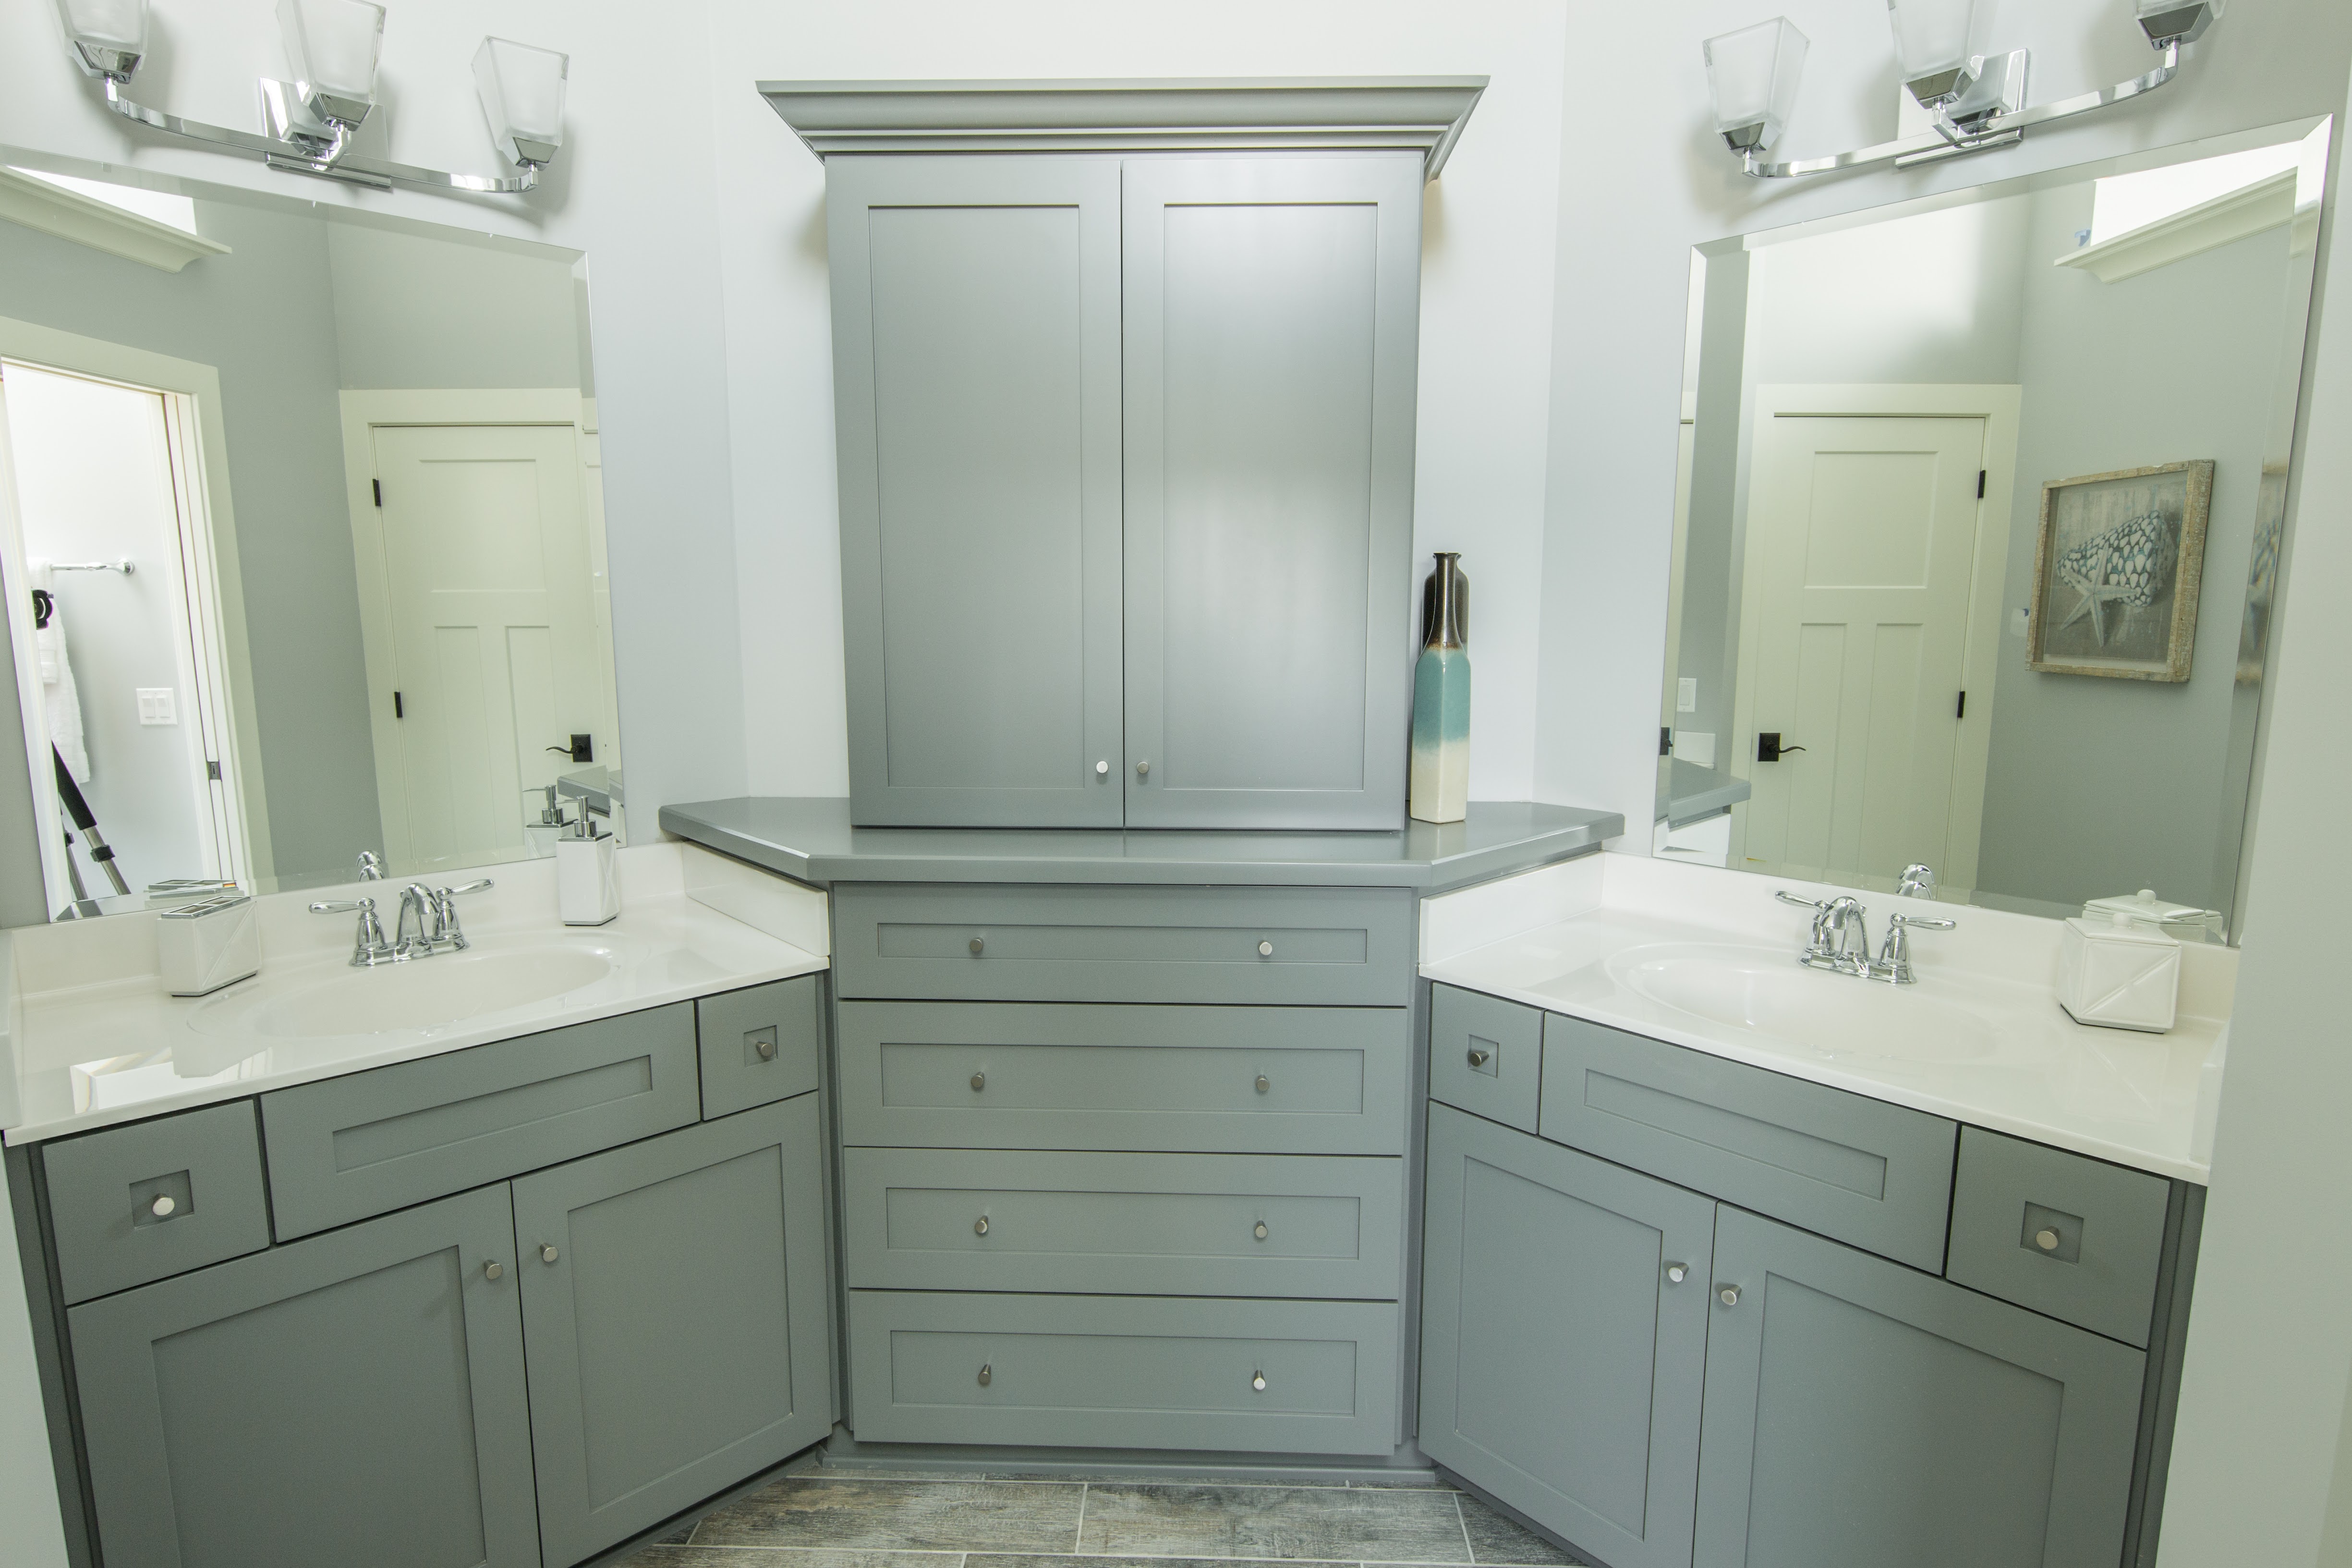 Shared bathroom space with two grey vanities and center storage tower